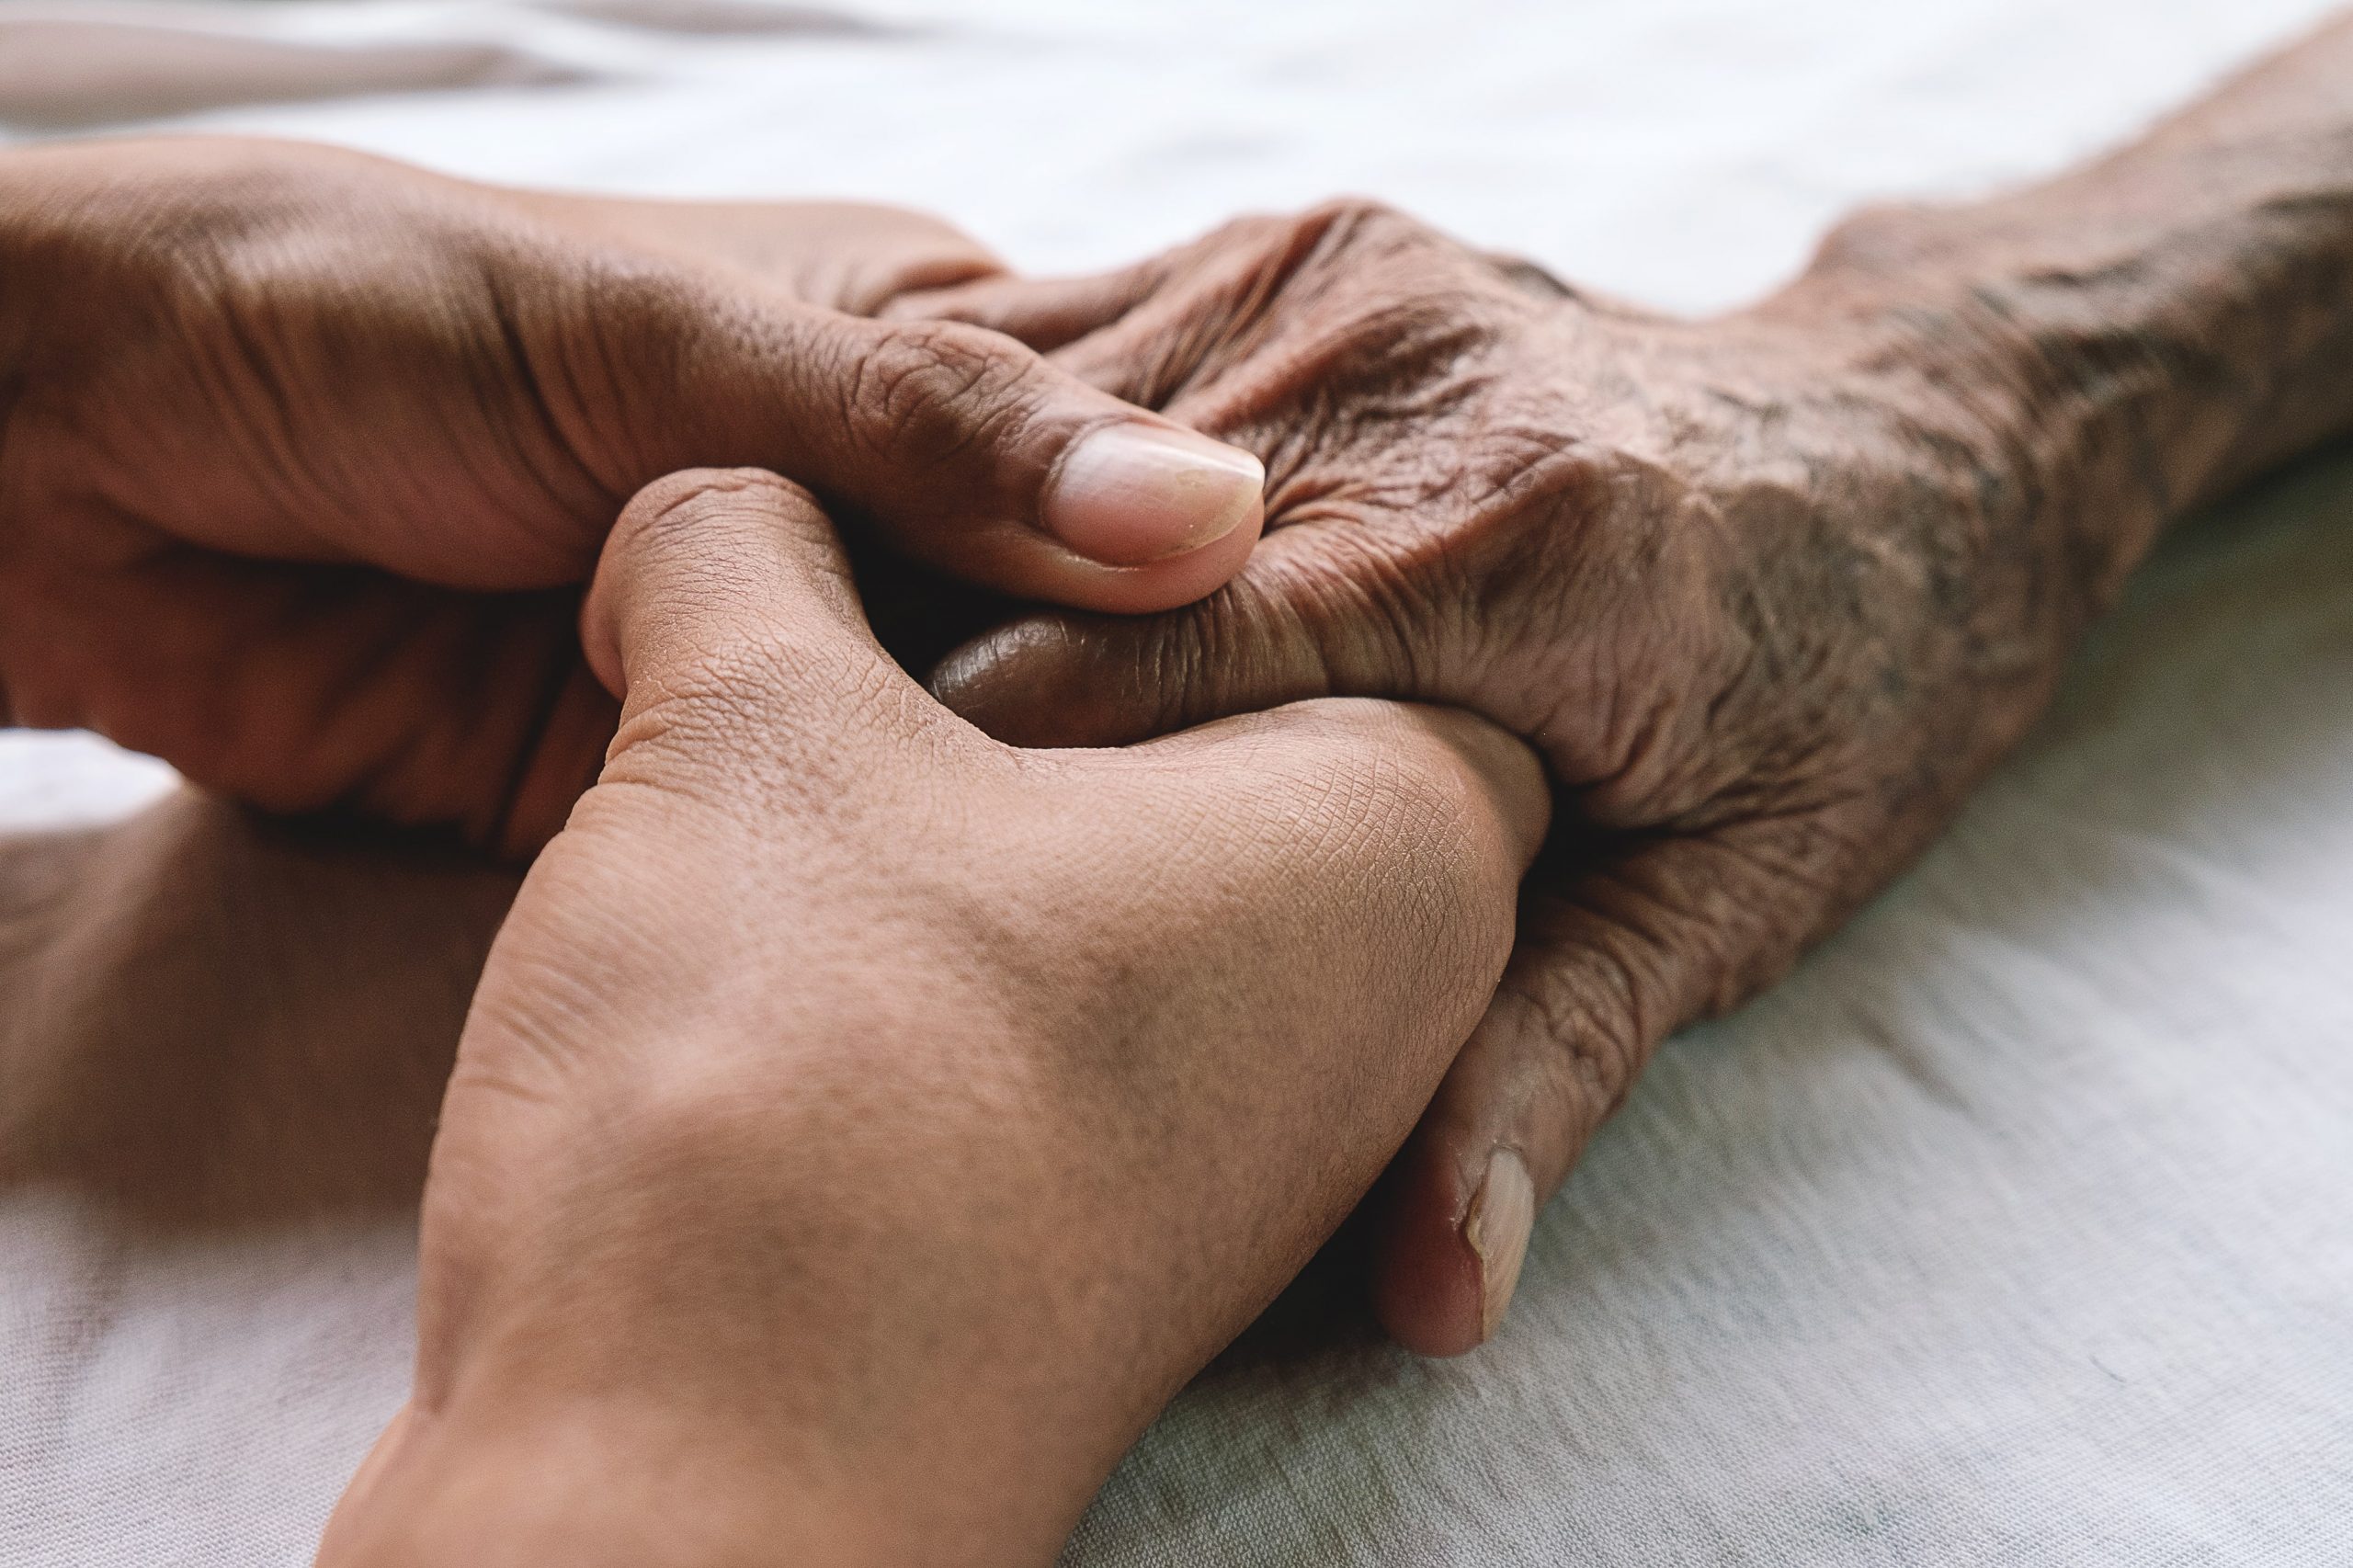 Focus on hands resting on bed, young person holding elderly person's hand